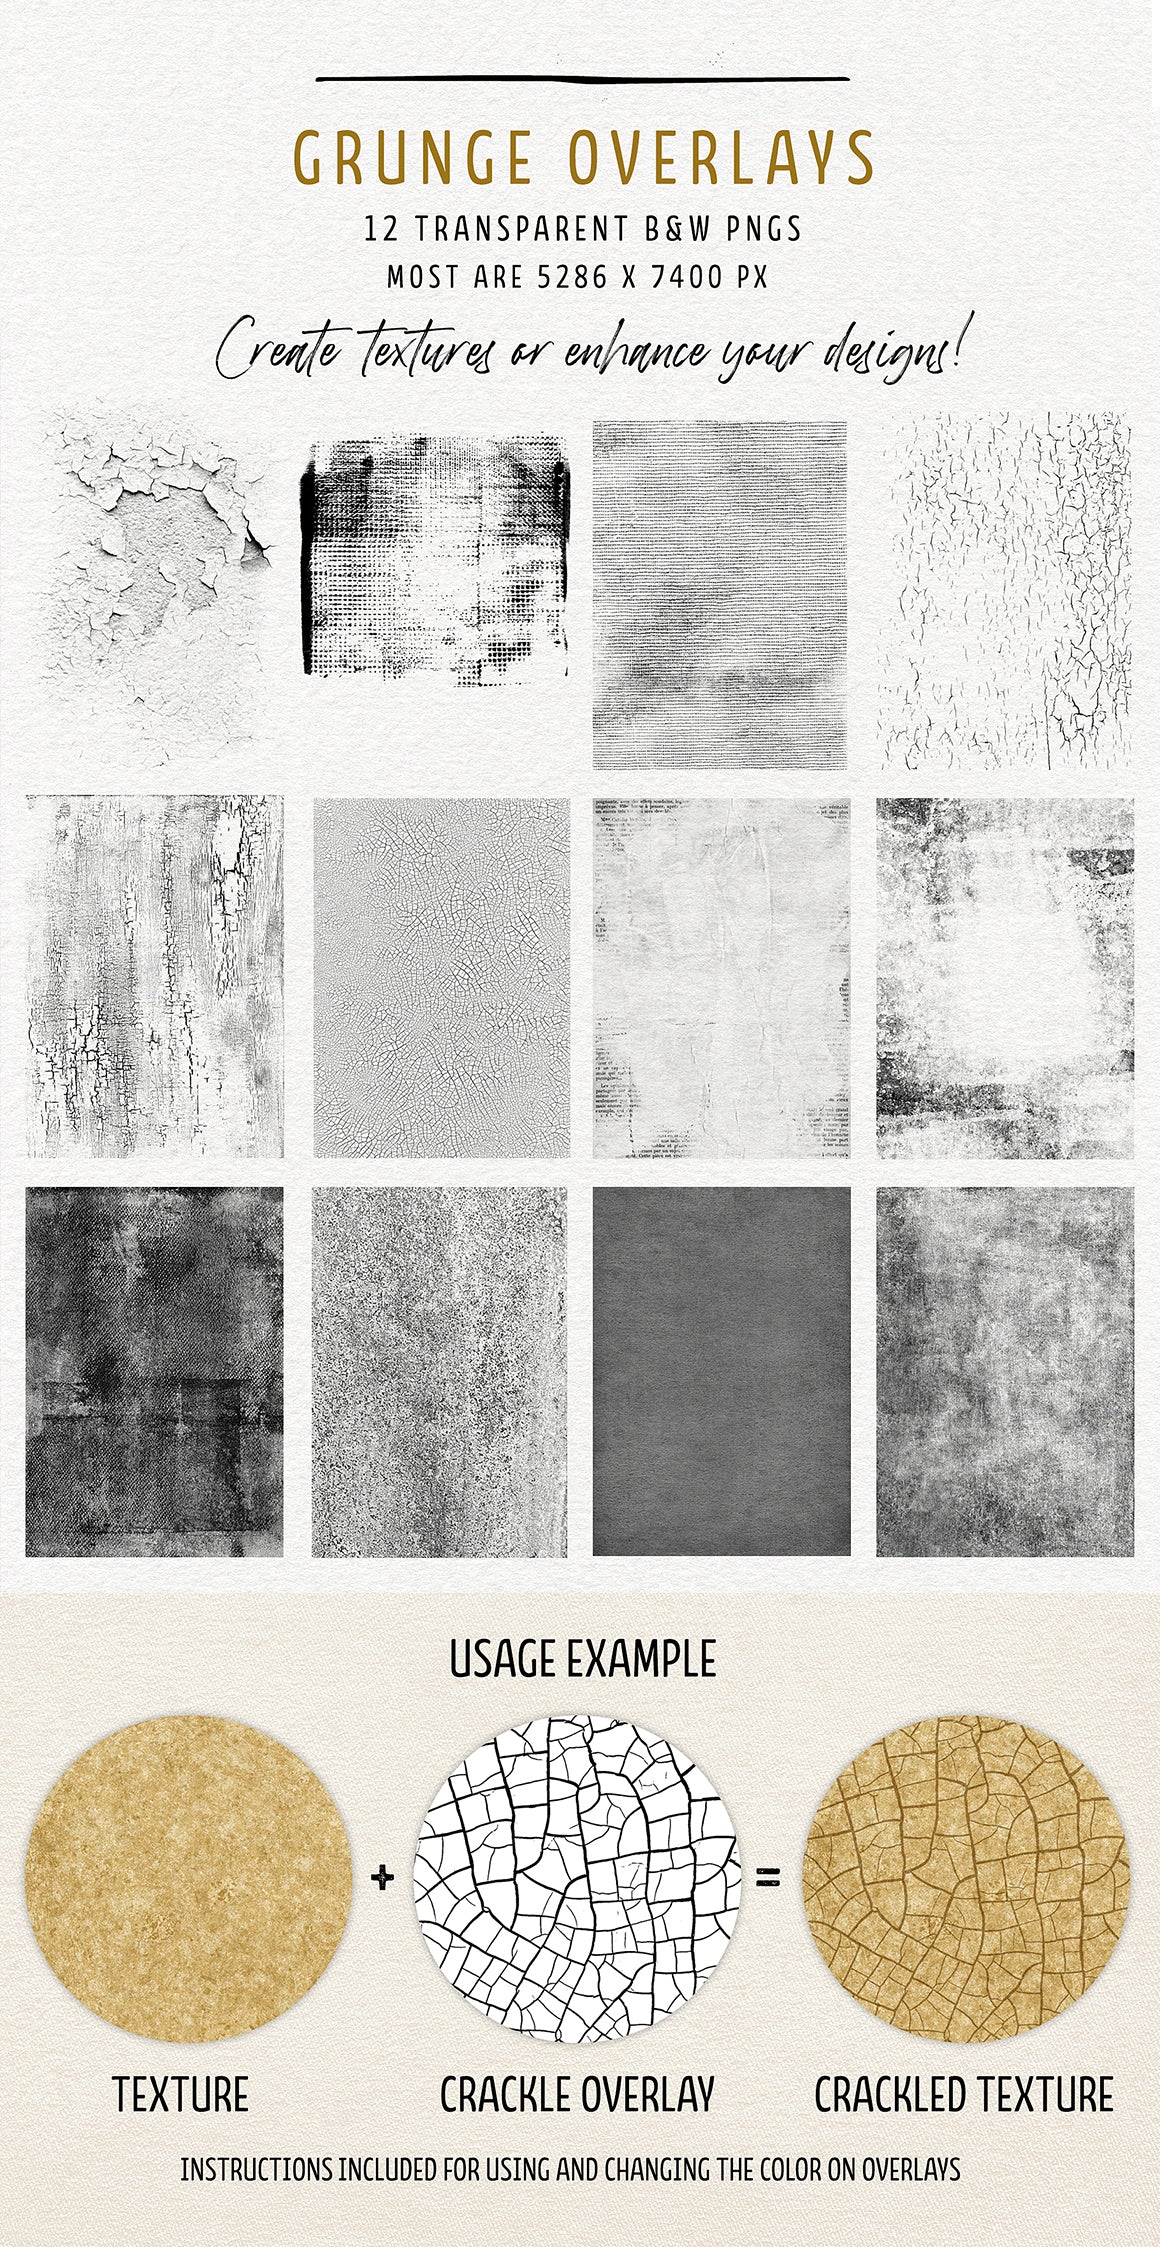 Grunge overlays, part of the Complete Inspirational Textures and Elements Collection.